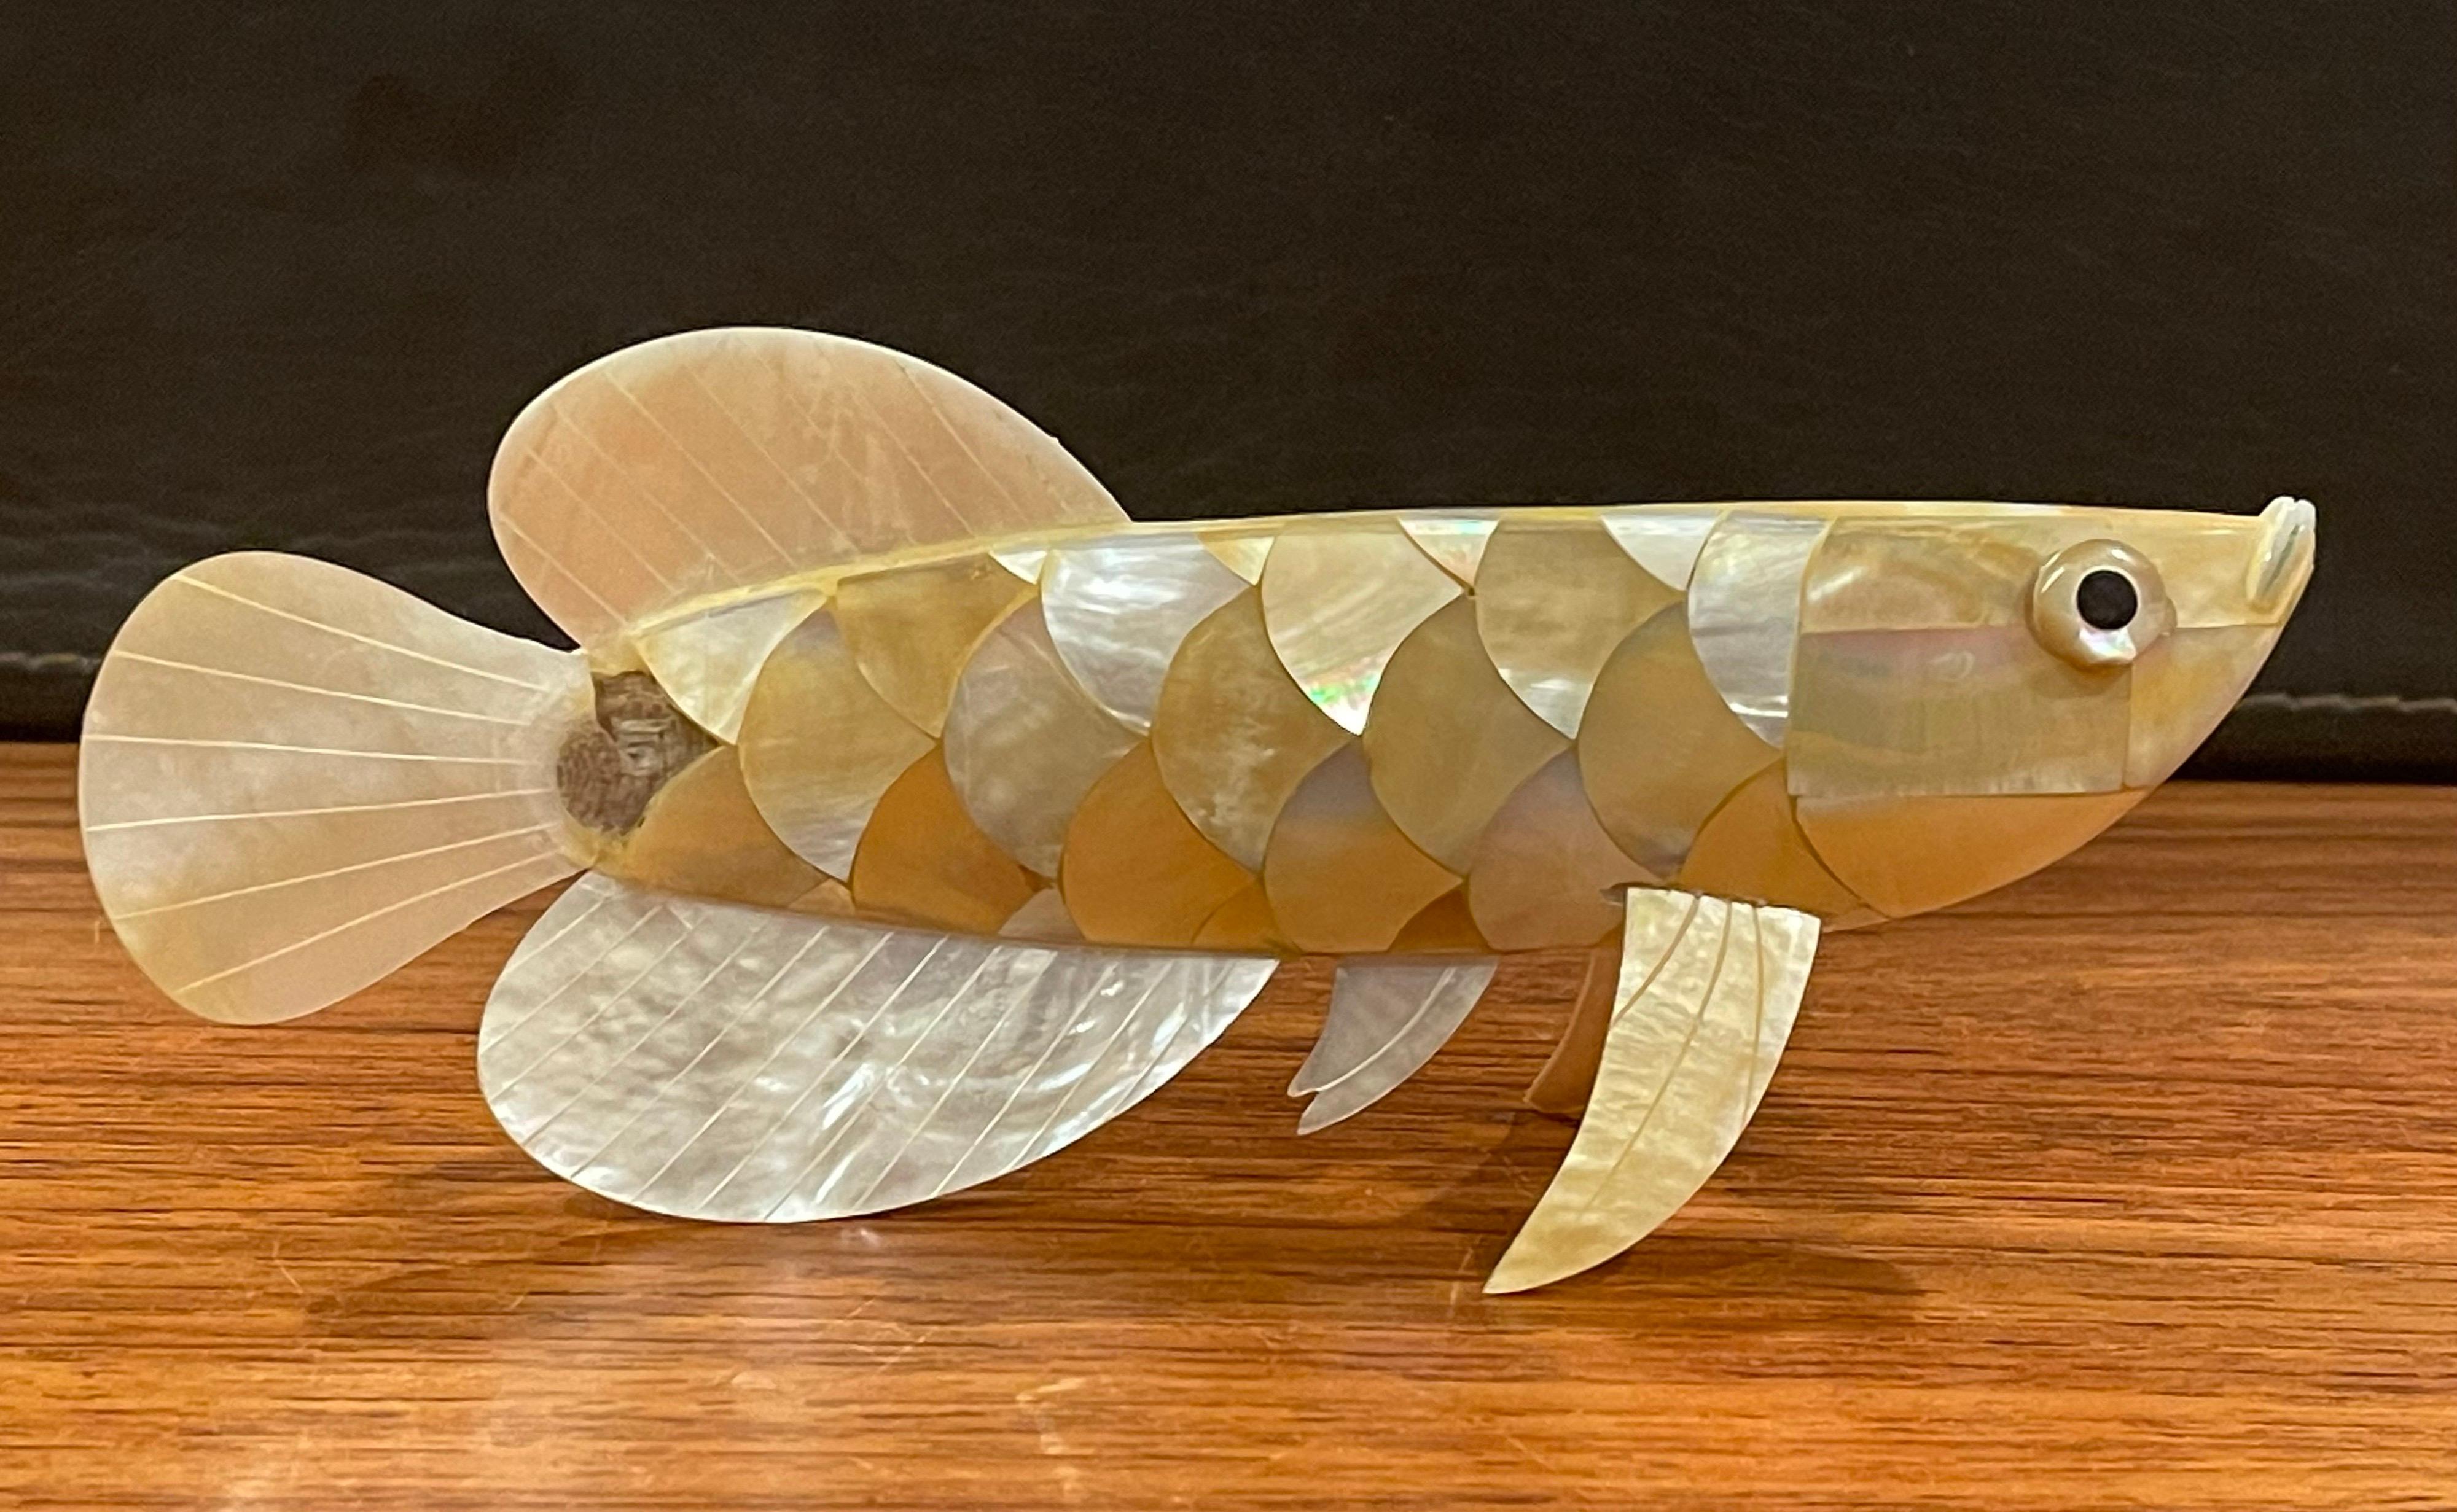 American Mother of Pearl / Abalone Shell Fish Sculpture For Sale